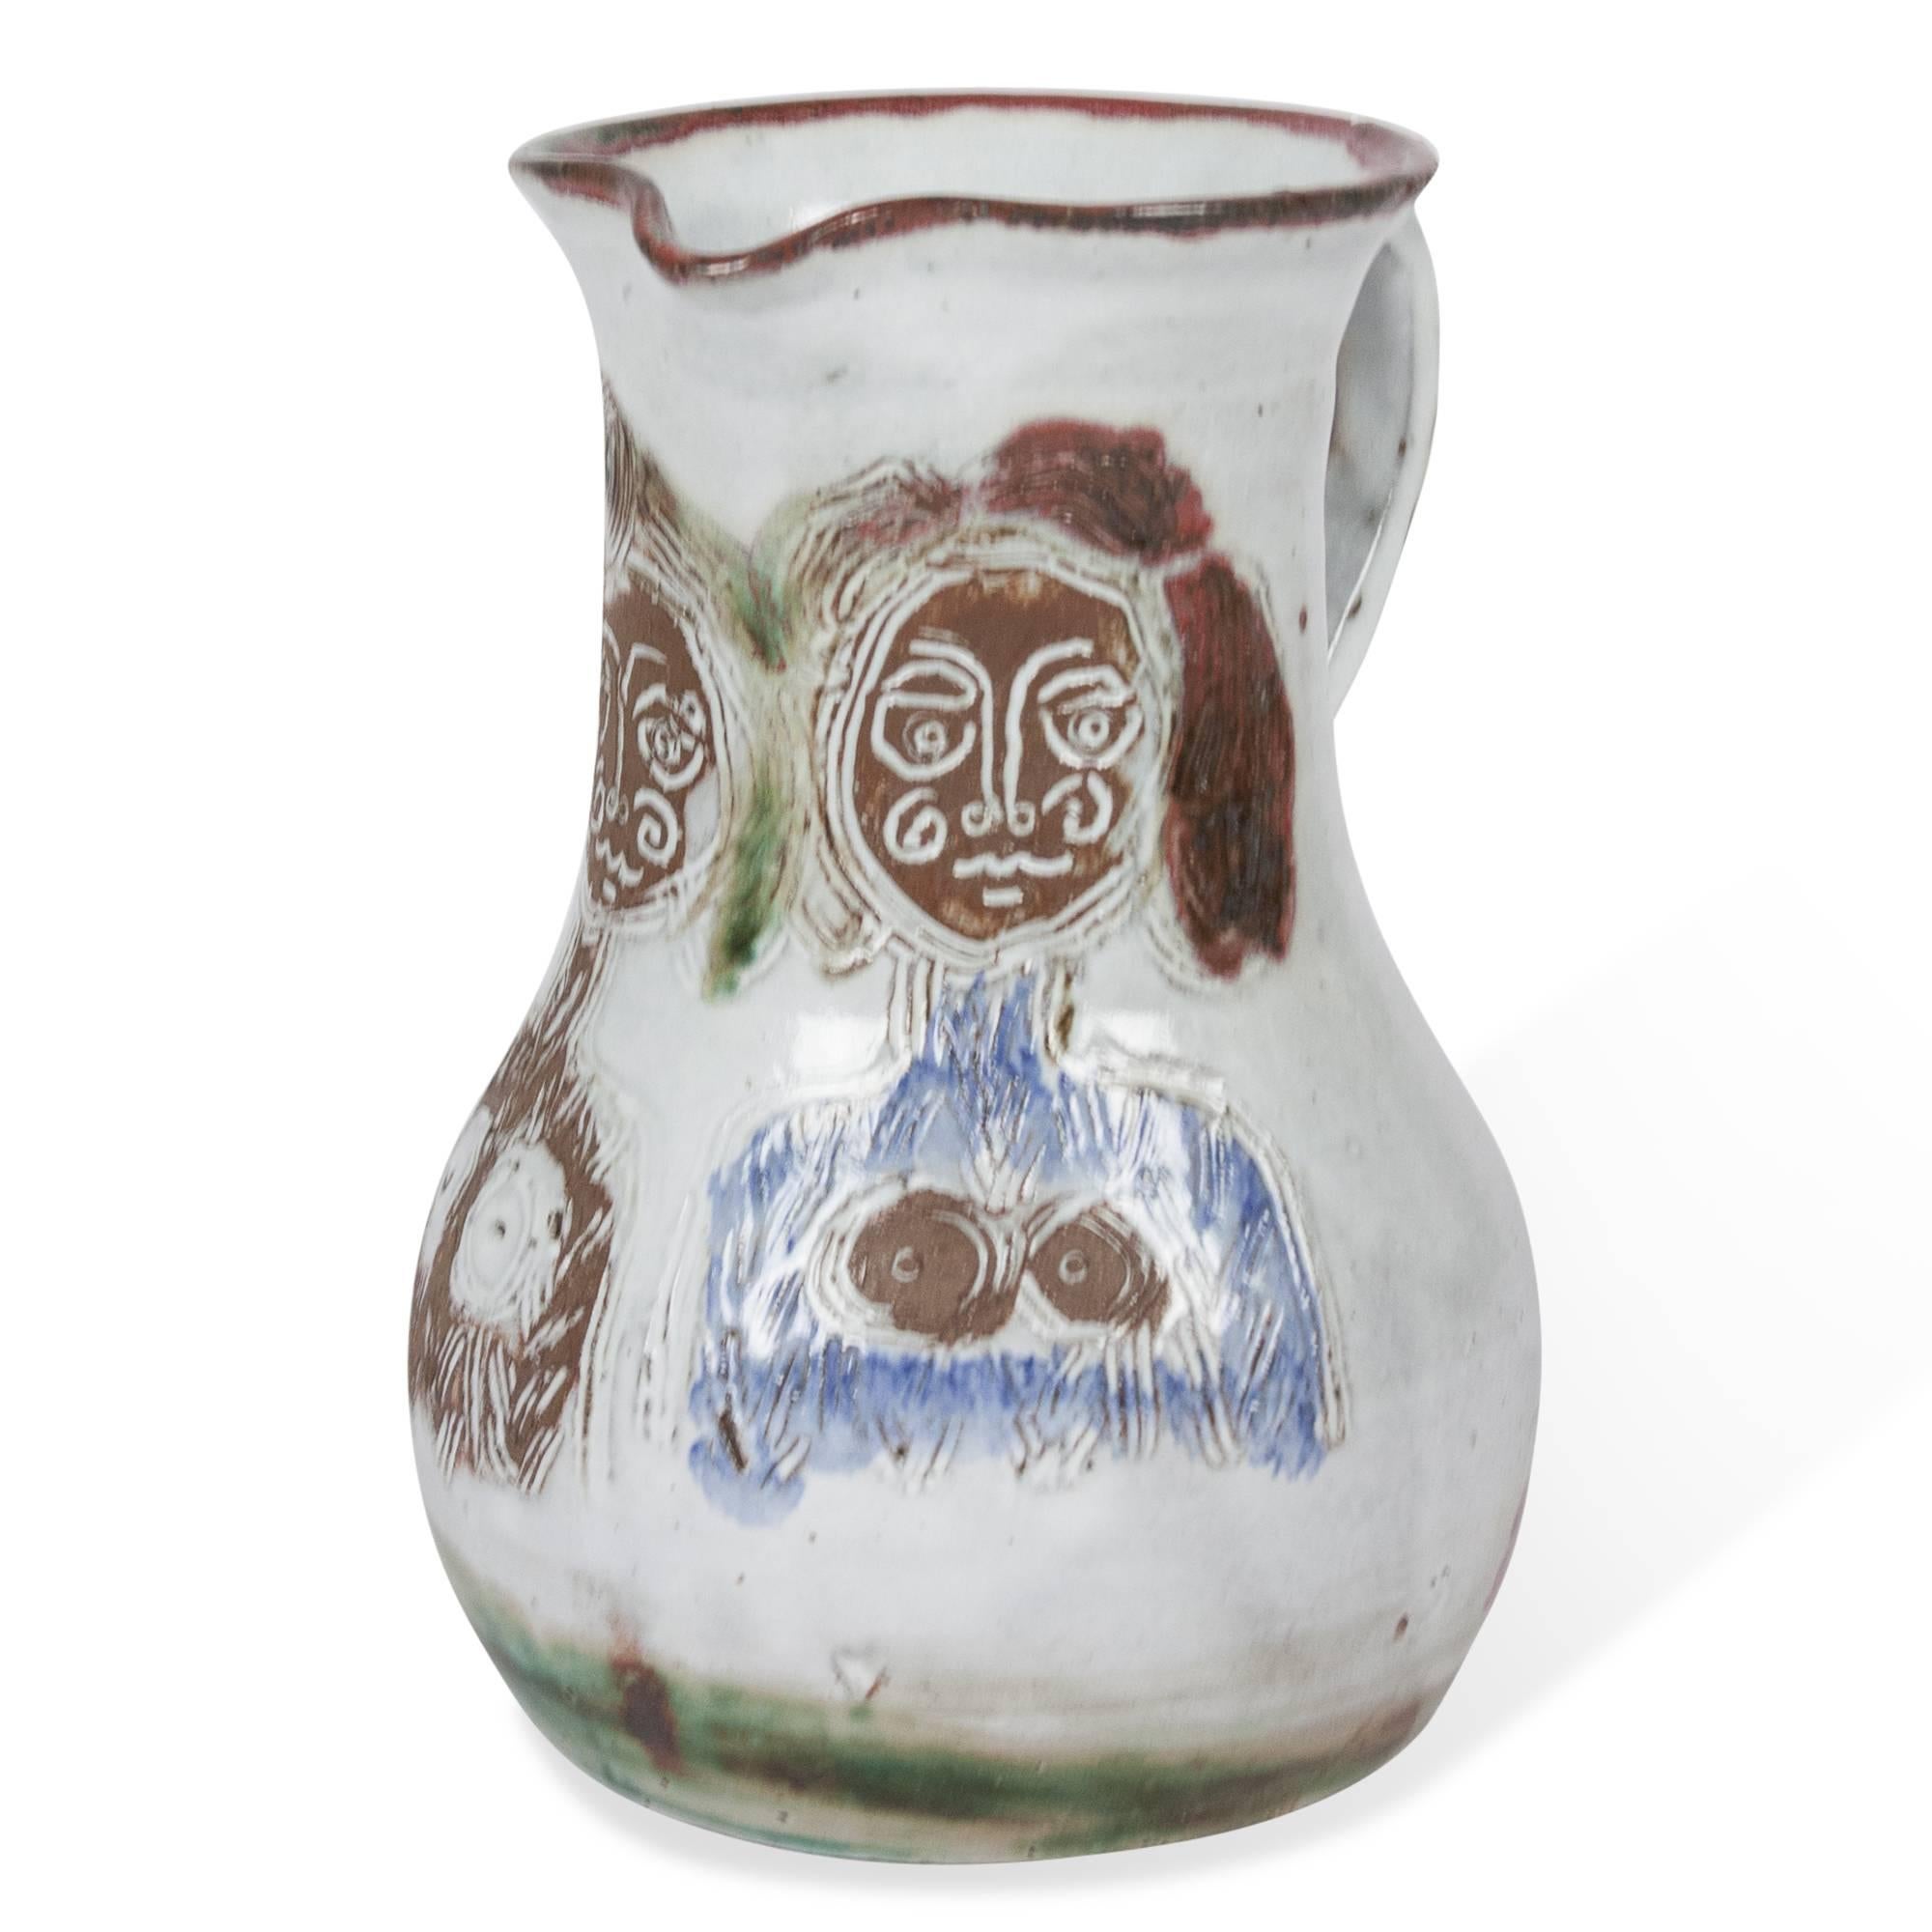 Glazed stoneware pitcher, decorated with an image of two females by Albert Thiry, French, circa 1950. Signed to underside. Measures: 5” D, 7” W, 10.5” H. (sats)